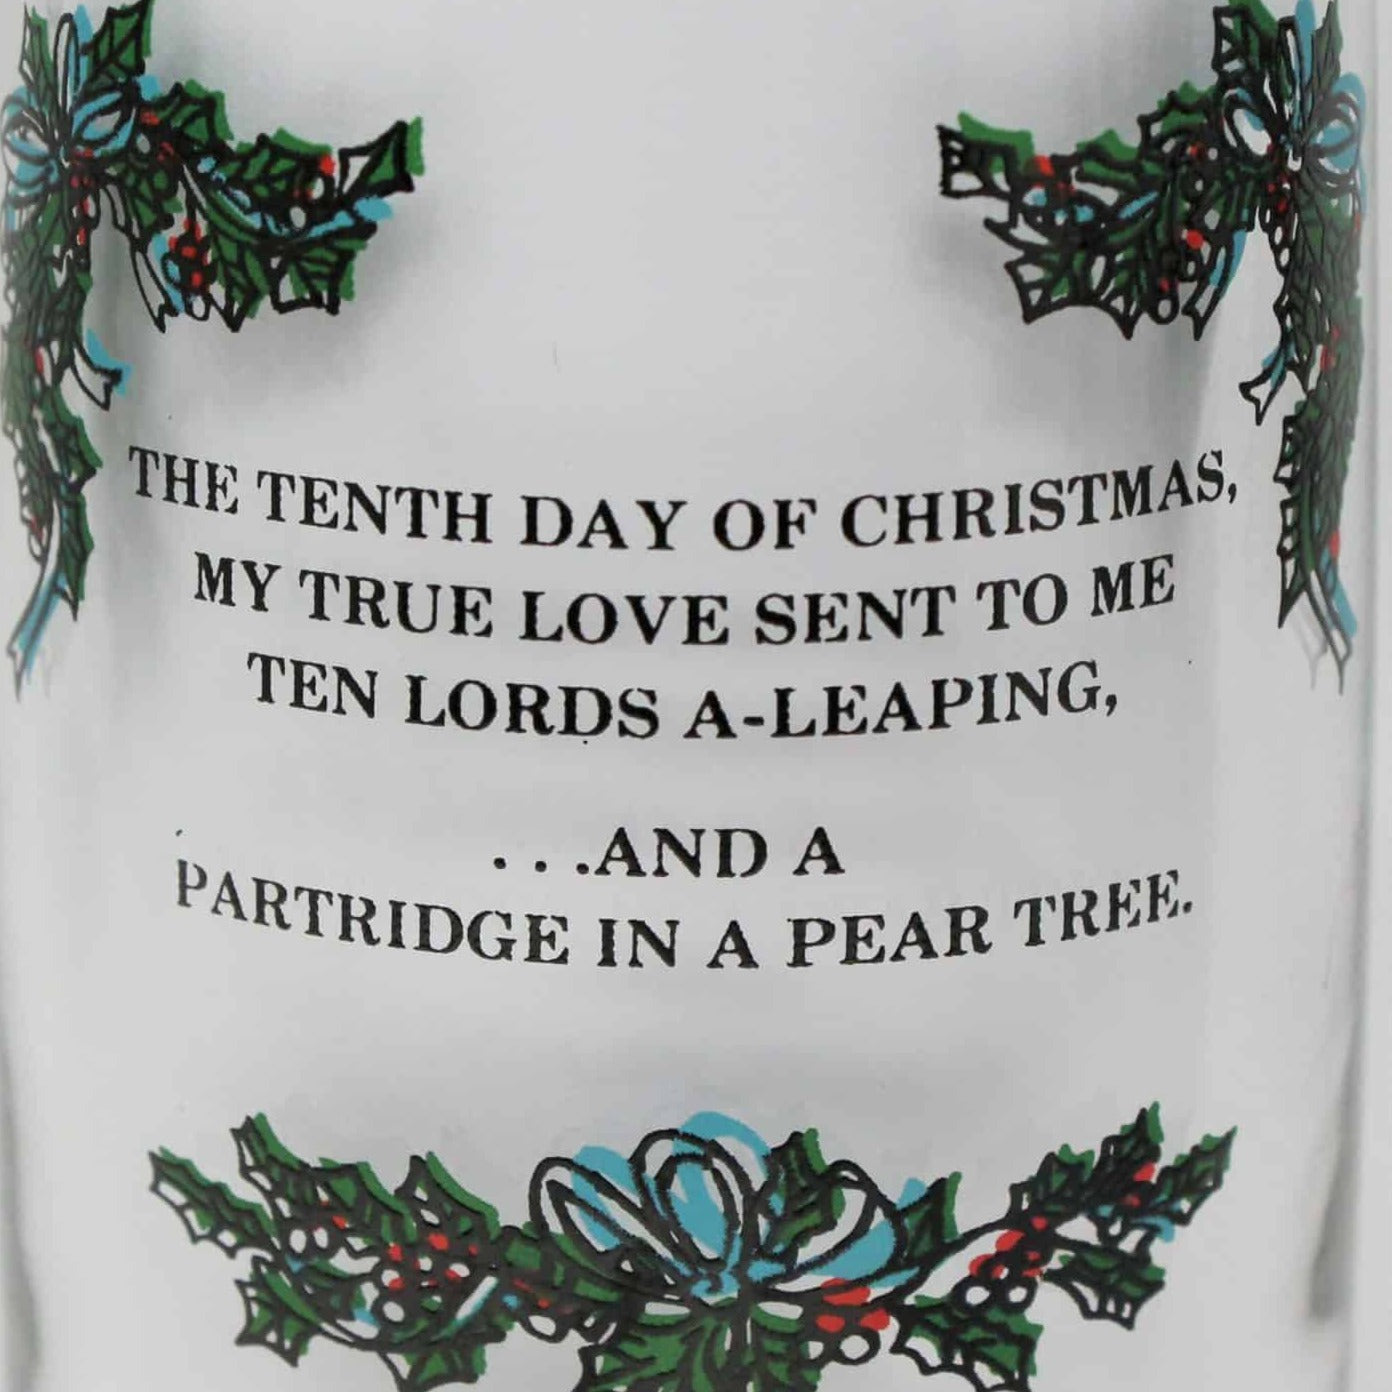 Glass Tumbler, Anchor Hocking 12 Days of Christmas, 10 Lords A Leaping, Vintage